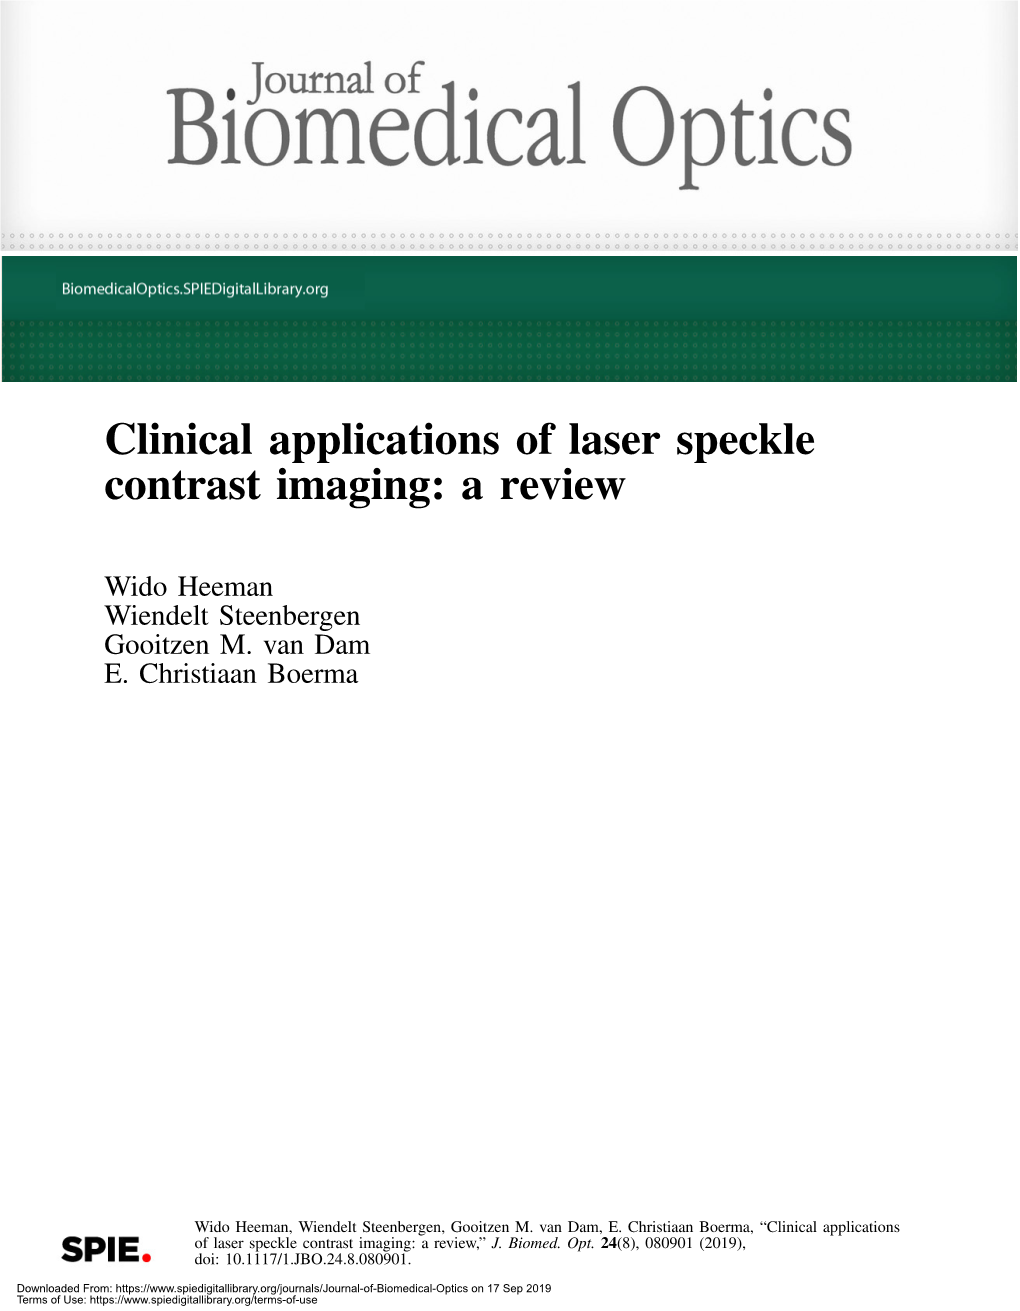 Clinical Applications of Laser Speckle Contrast Imaging: a Review